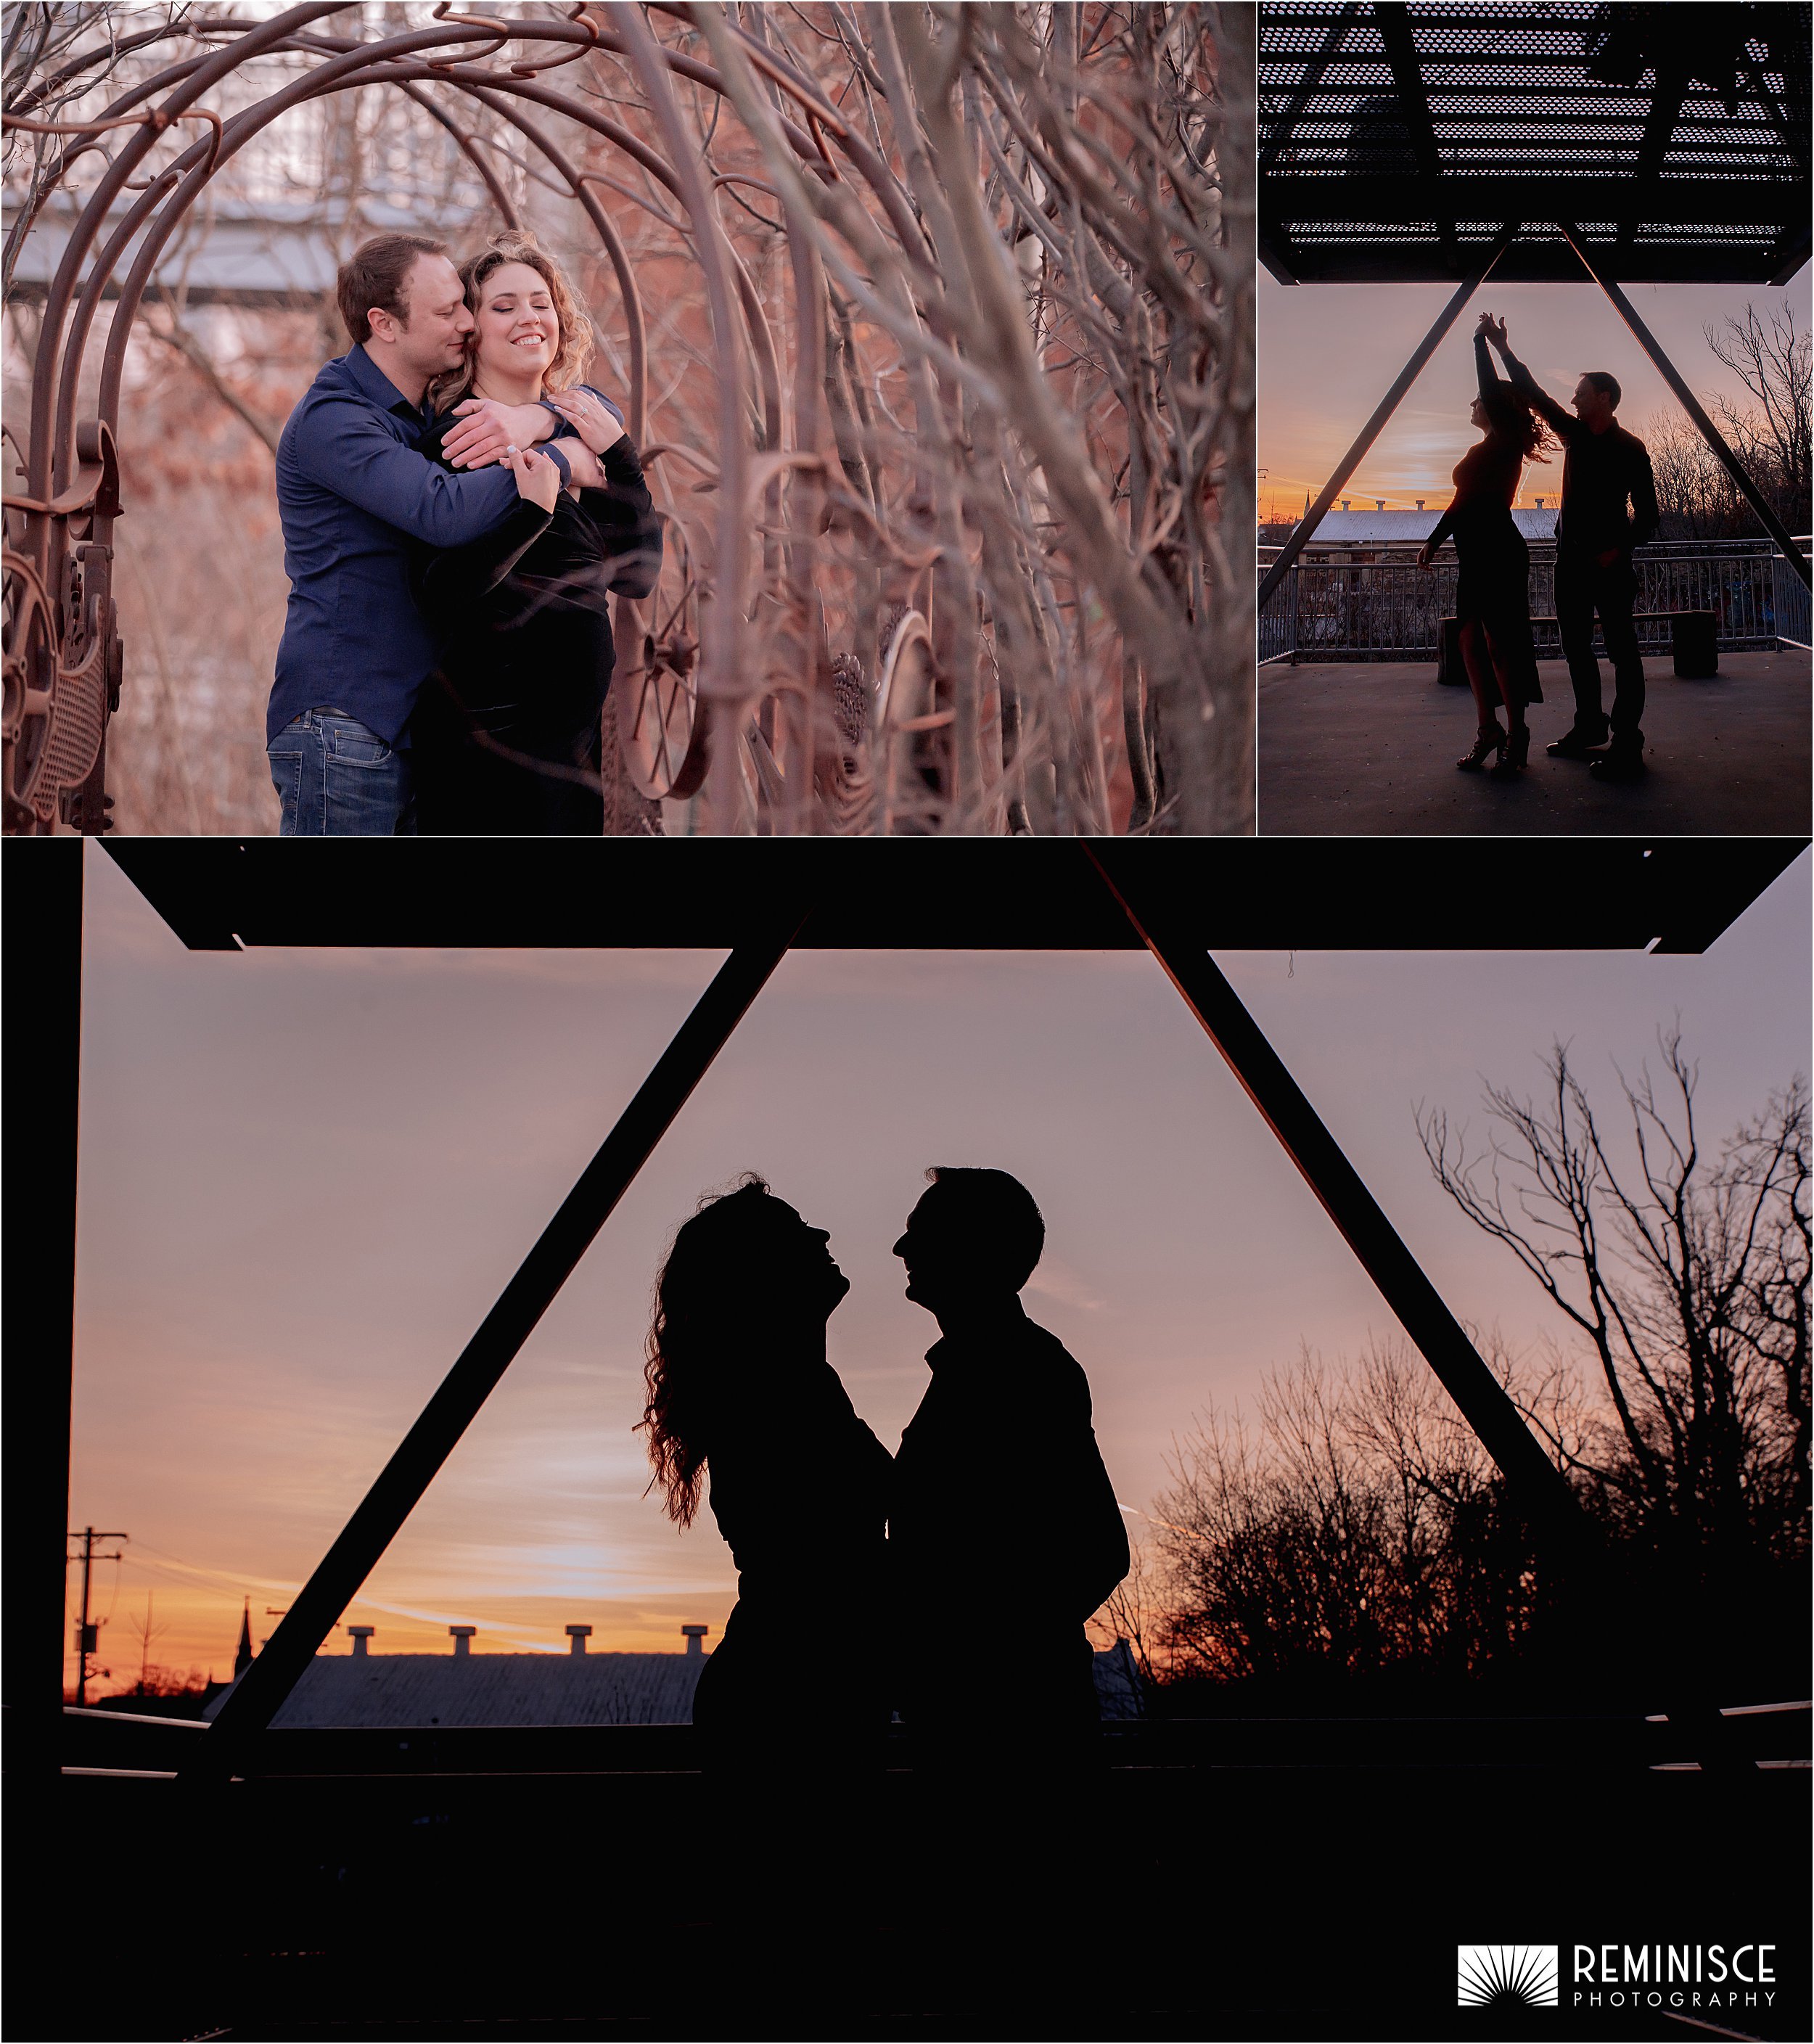 08-sunset-sihlouette-engaged-couple-romantic-artistic-outdoor-posed-portraits.JPG